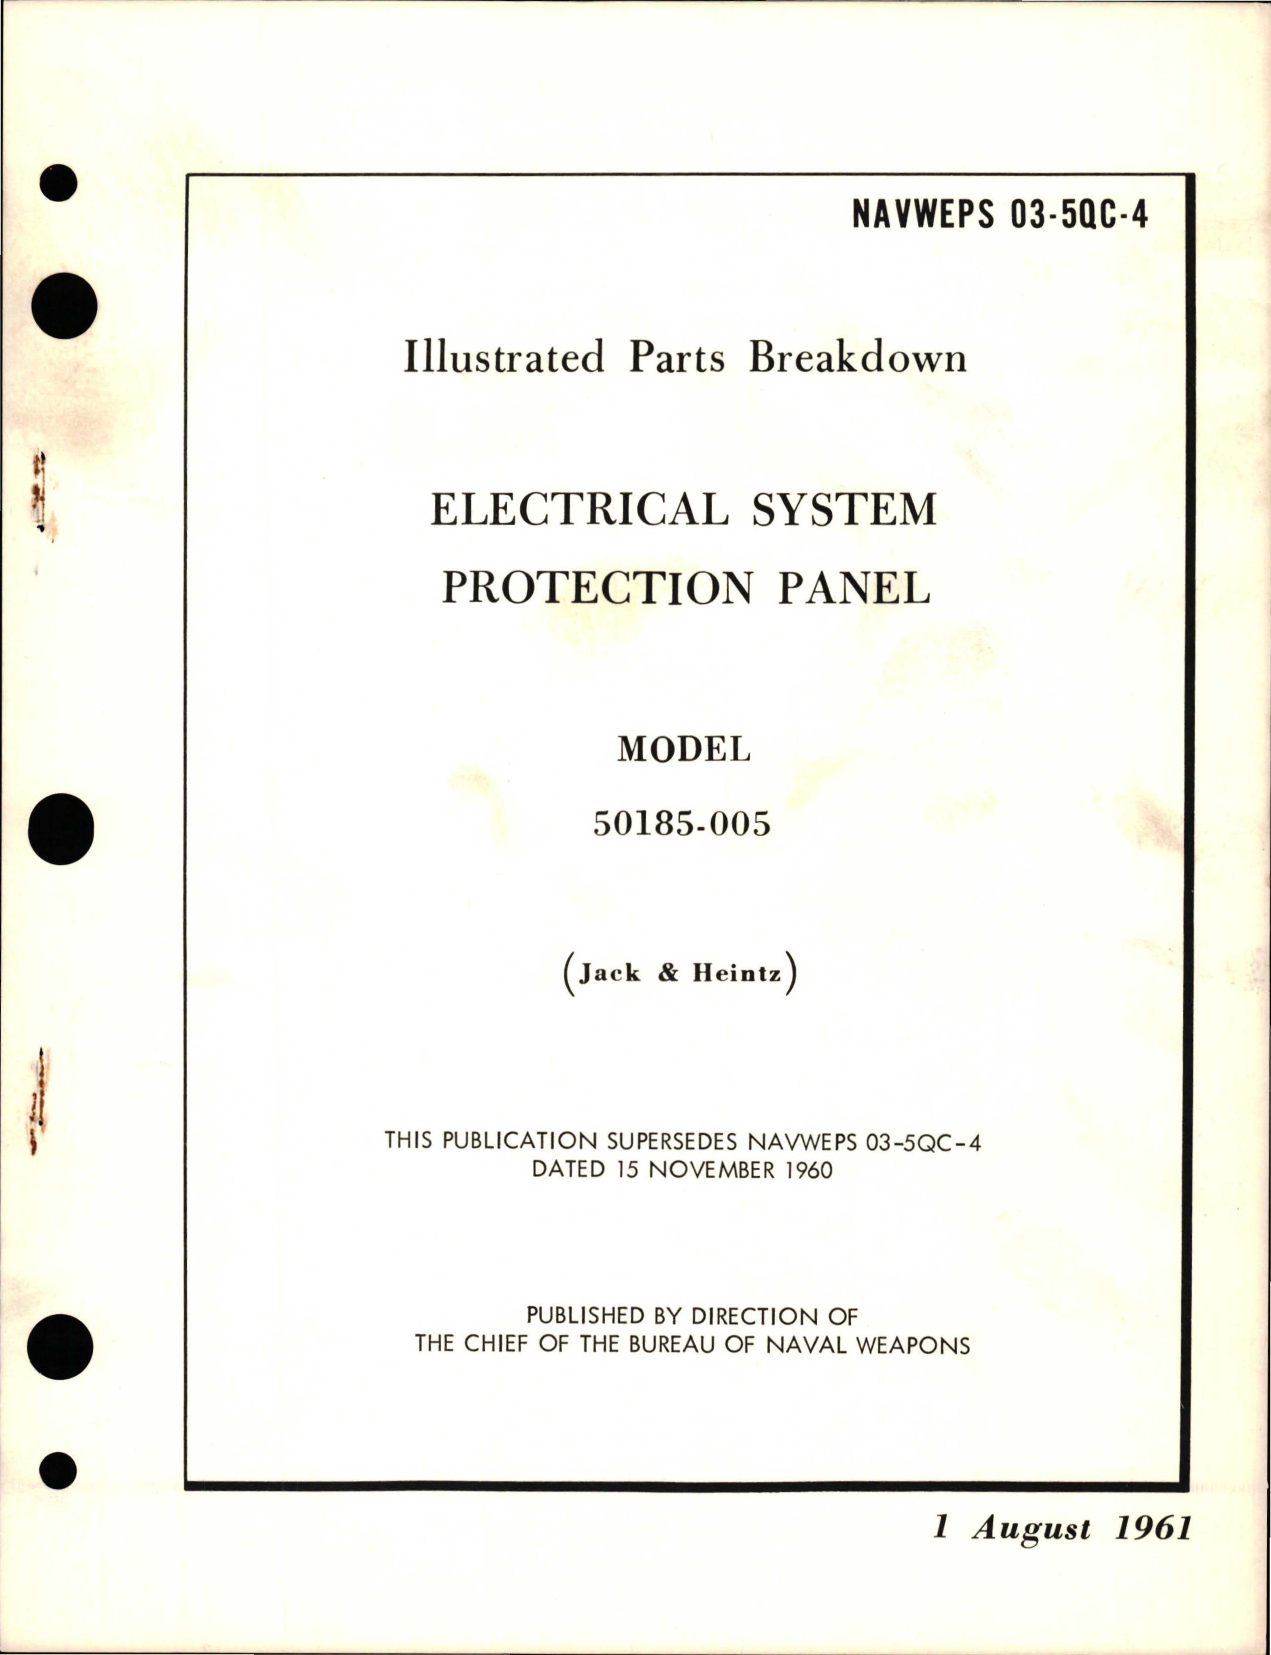 Sample page 1 from AirCorps Library document: Illustrated Parts Breakdown for Electrical System Protection Panel - Model 50185-005 